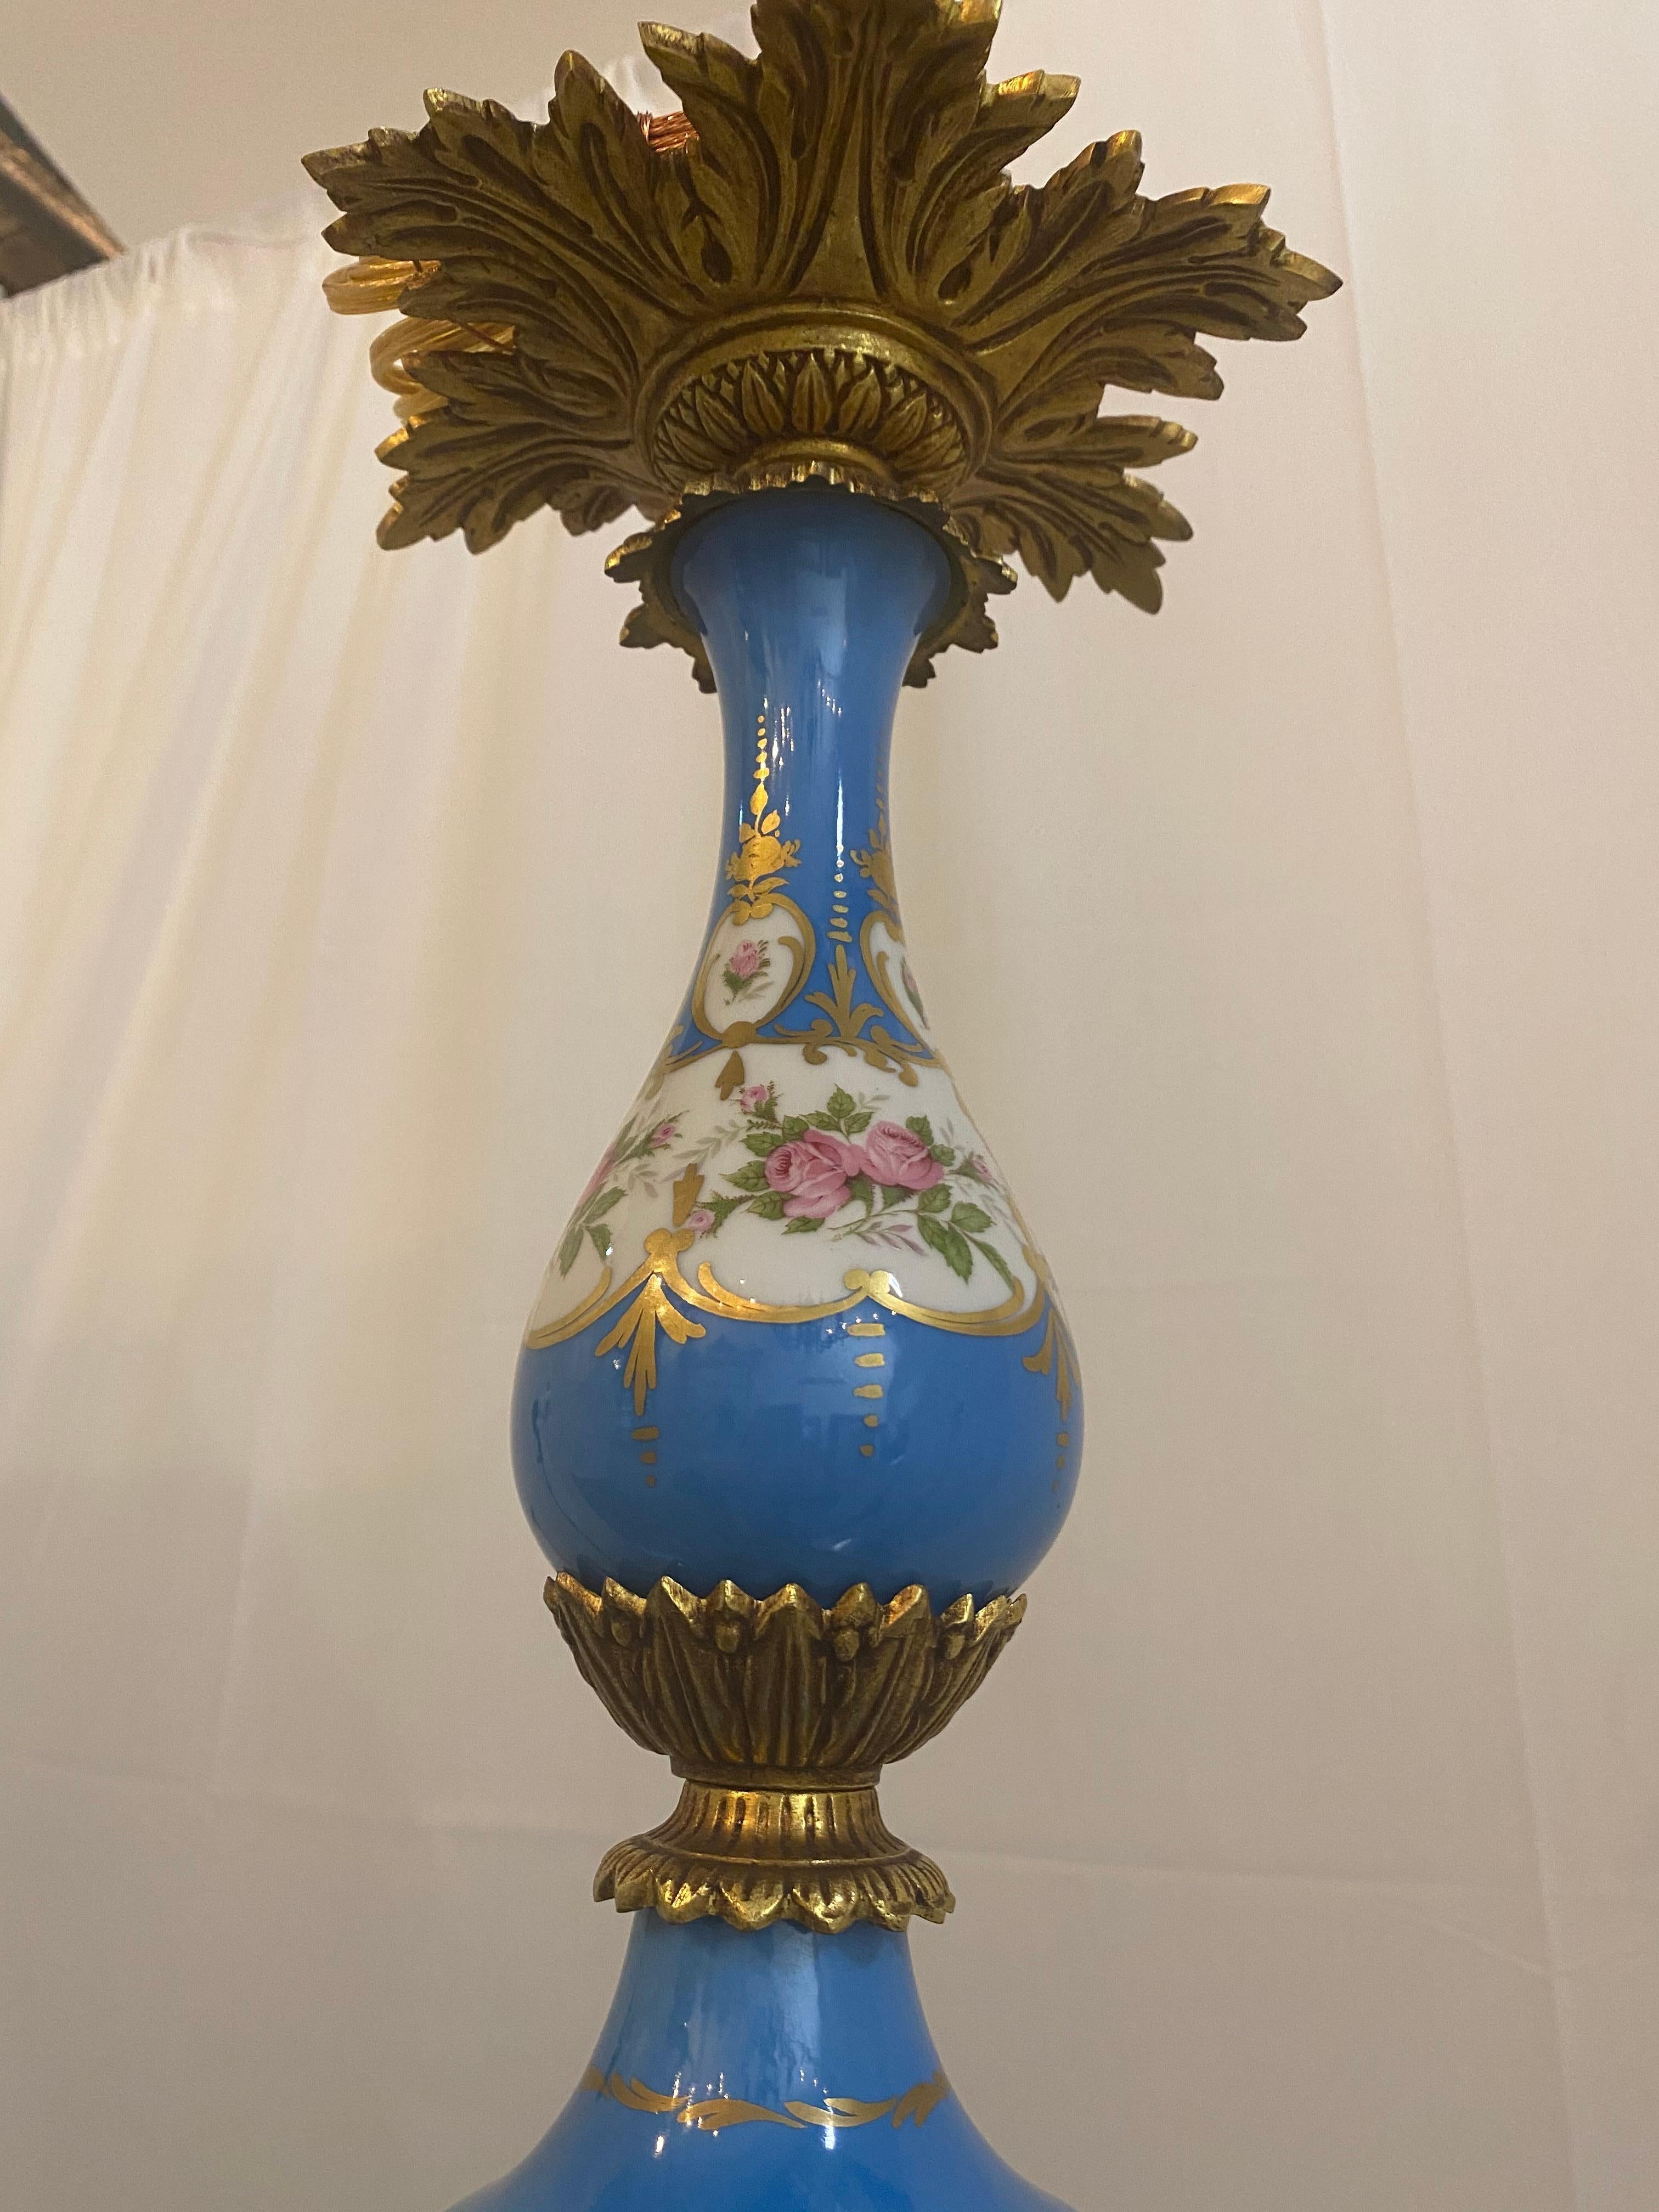 Vintage bronze, blue opaline floral chandelier, amazing color and pictures with floral design around the candle holders, and on the center. Bronze all on the edges making it look beautiful.